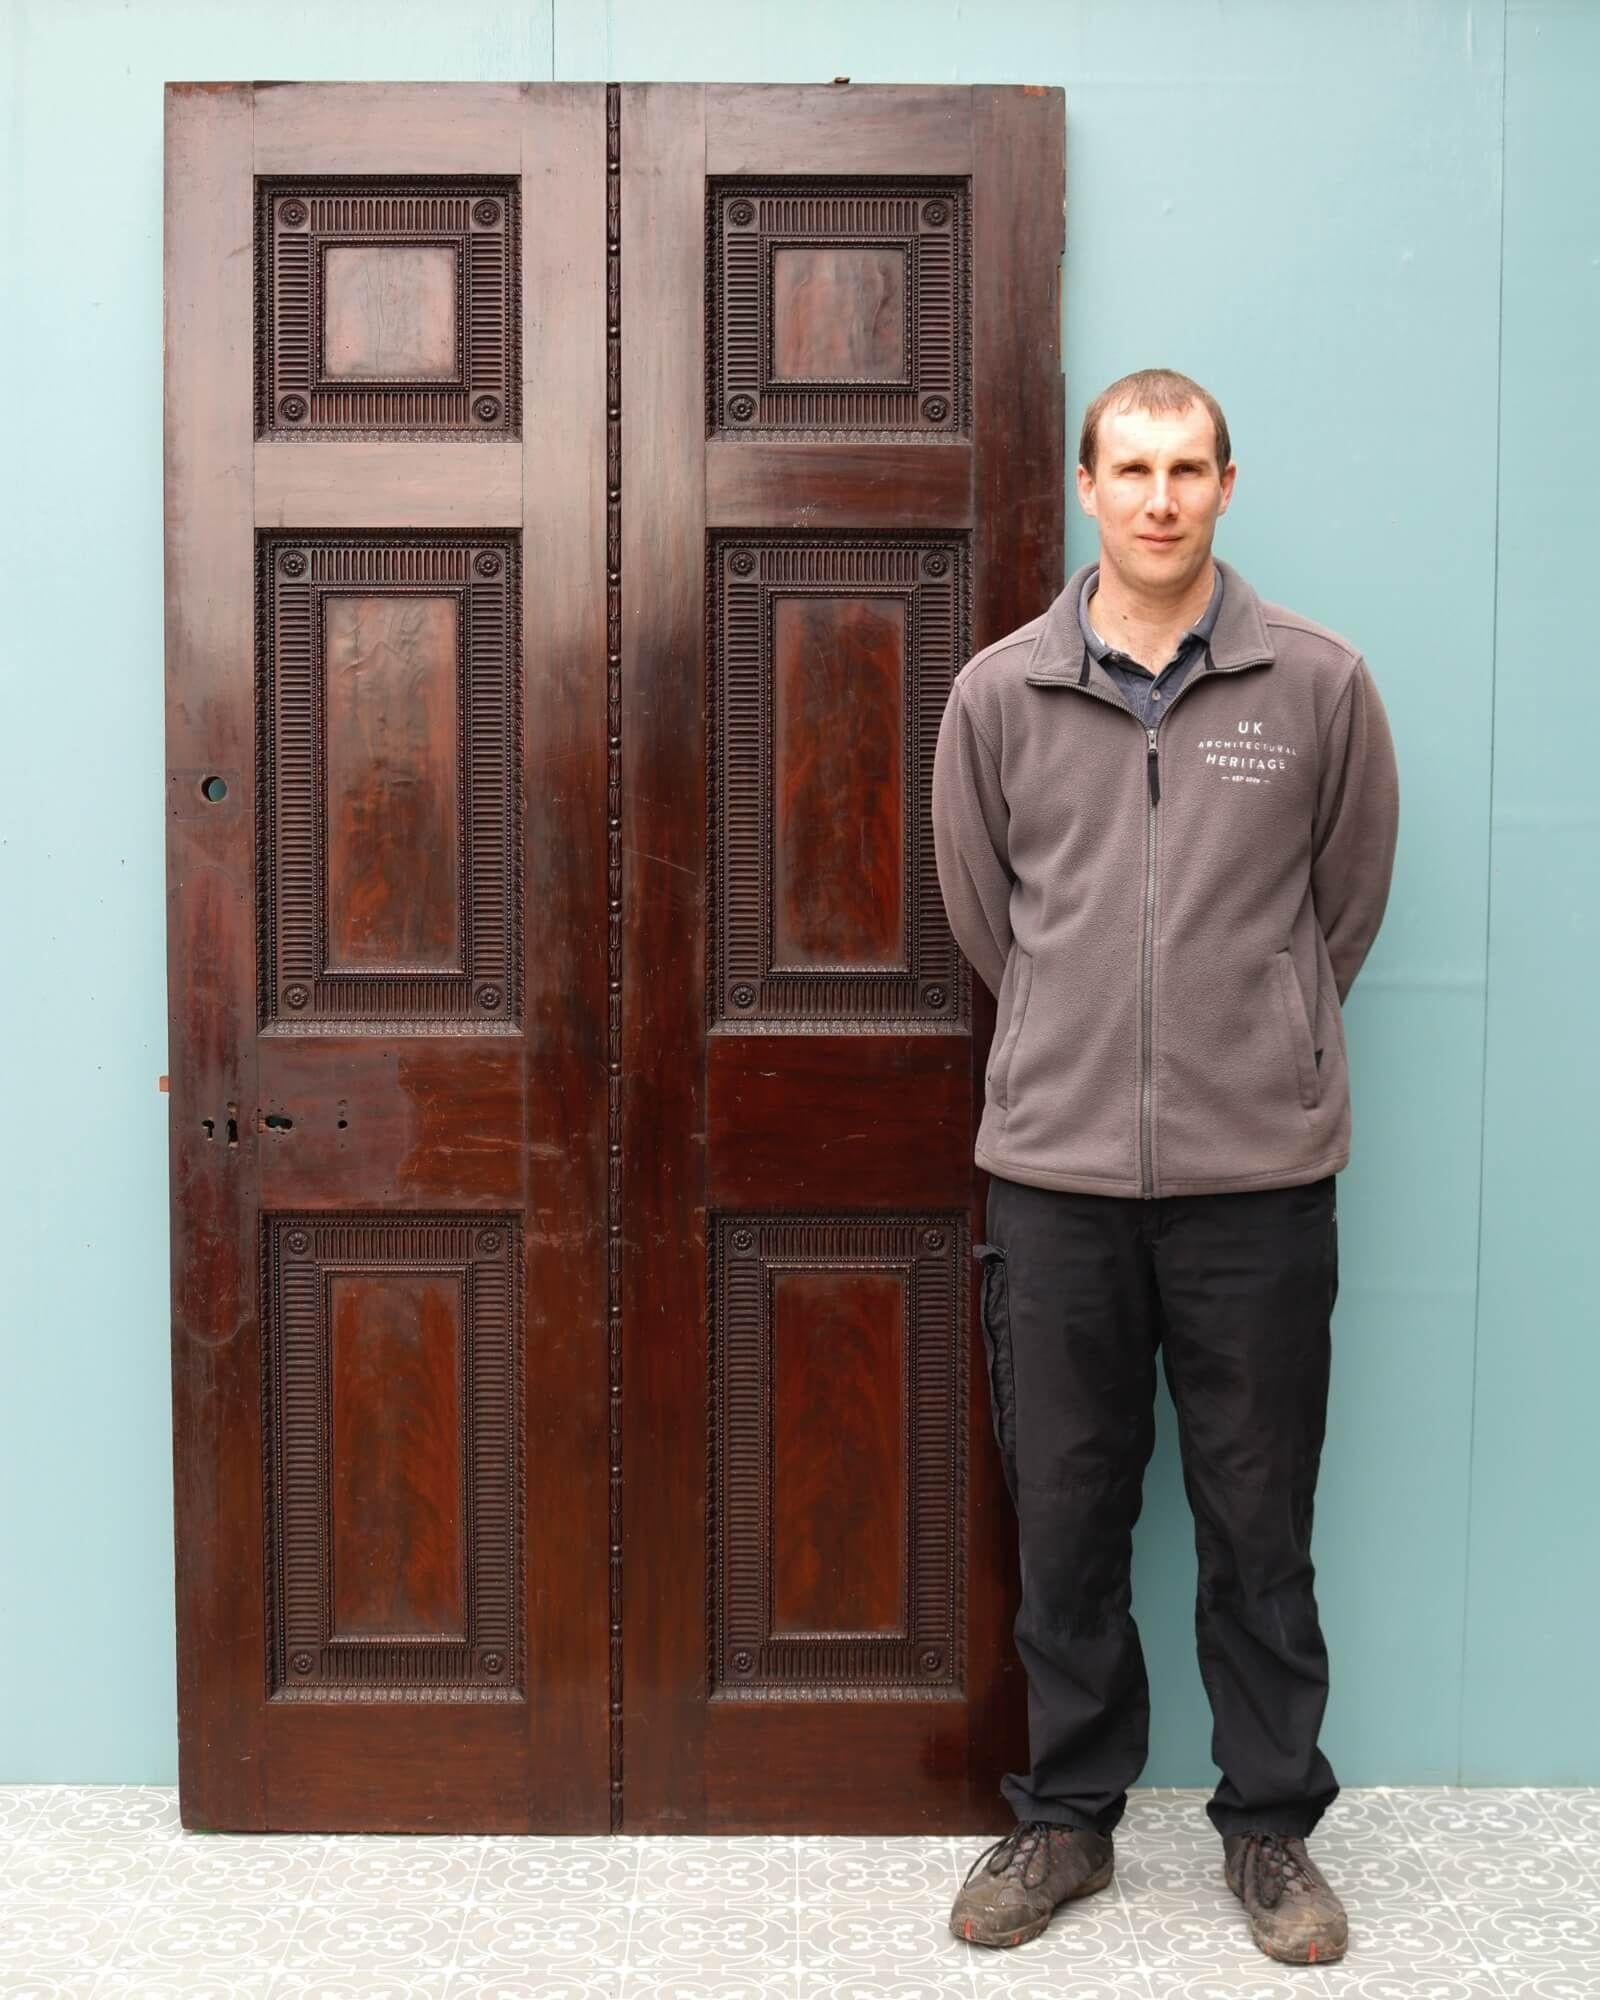 A very large Georgian mahogany door, sourced from an English country house, suitable for exterior or interior use. At over 200 years old and showcasing a handsome warm mahogany colour, this impressive reclaimed door has stood the test of time and